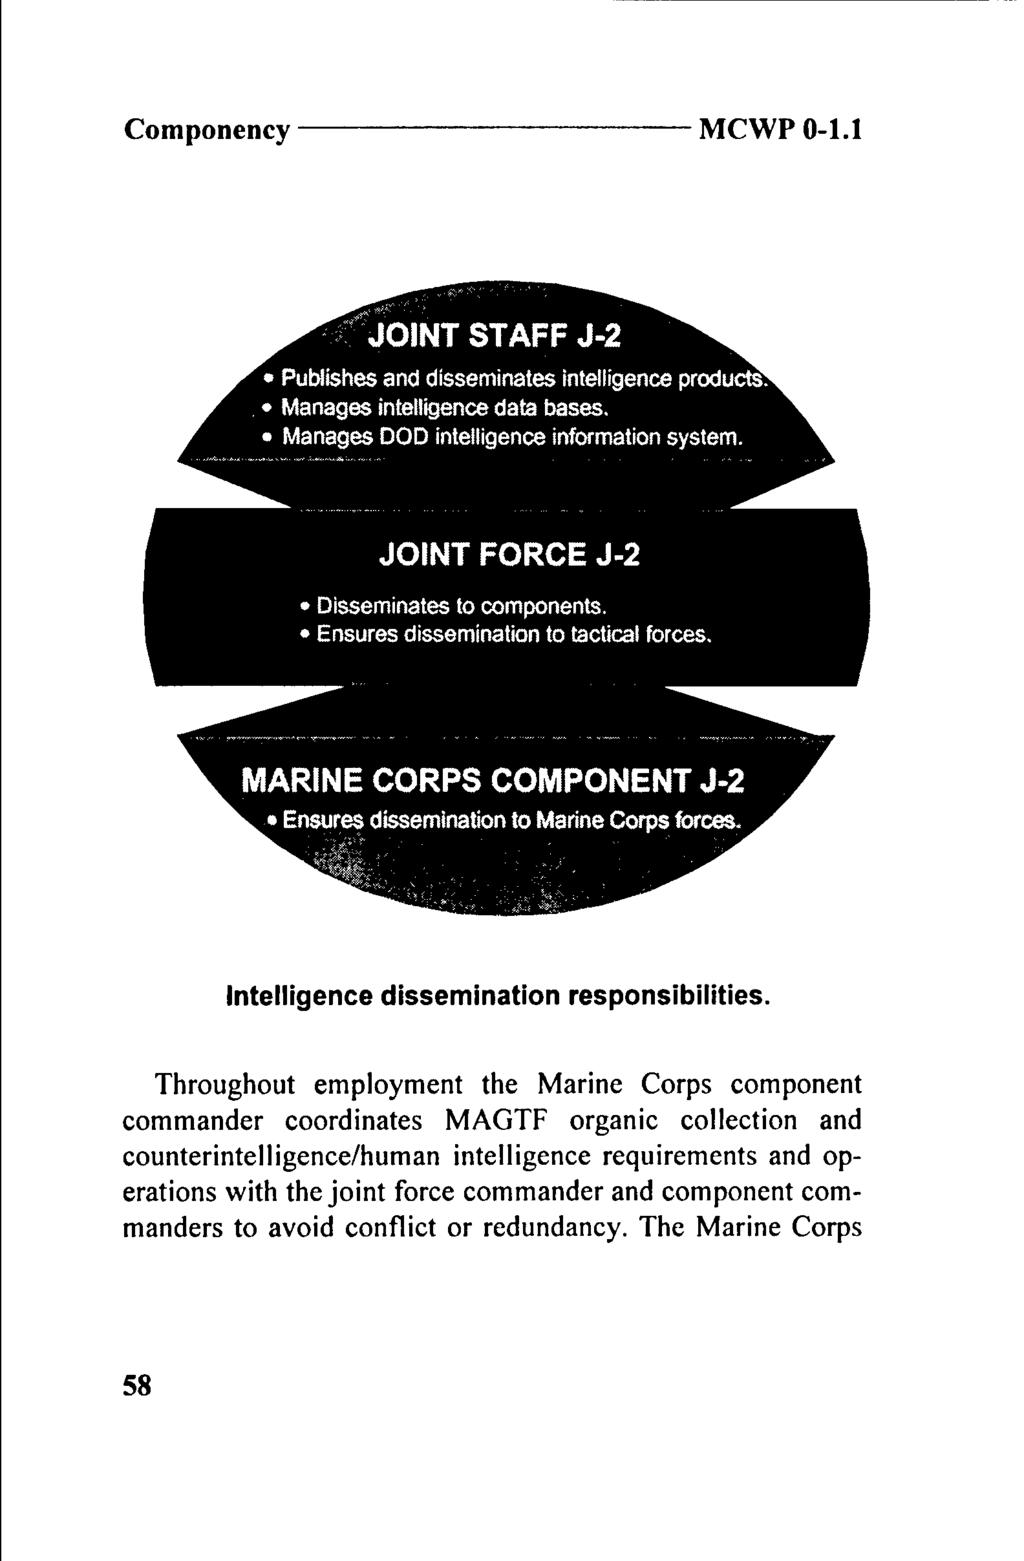 Componency MCWP 0-1.1 1 JOINT STAFF J-2 Publishes and disseminates intelligence products'. Manages intelligence data bases. Manages DOD intelligence information system.